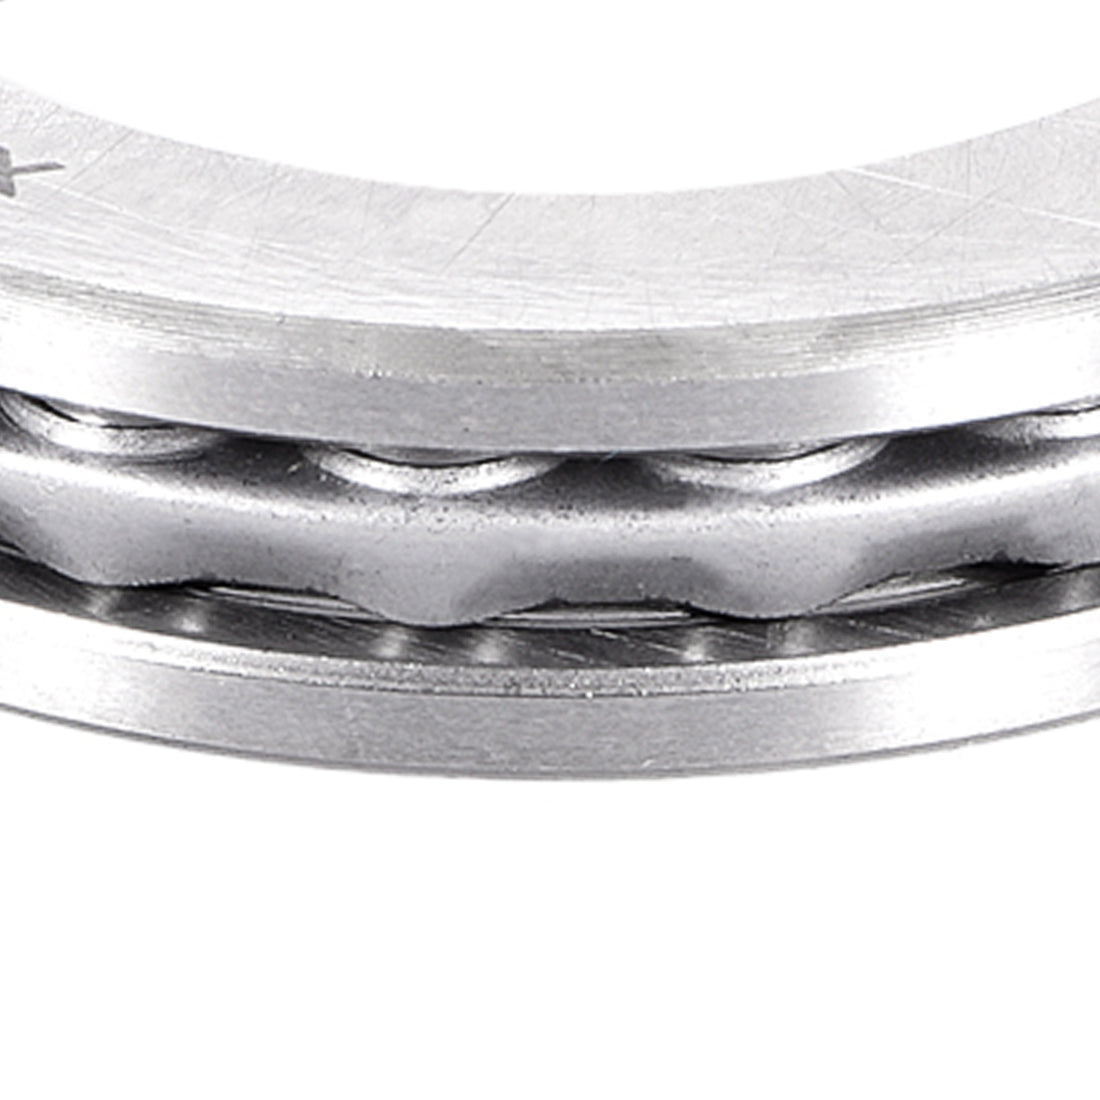 uxcell Uxcell Thrust Ball Bearings Chrome Steel One-Way Direction Steel Cage